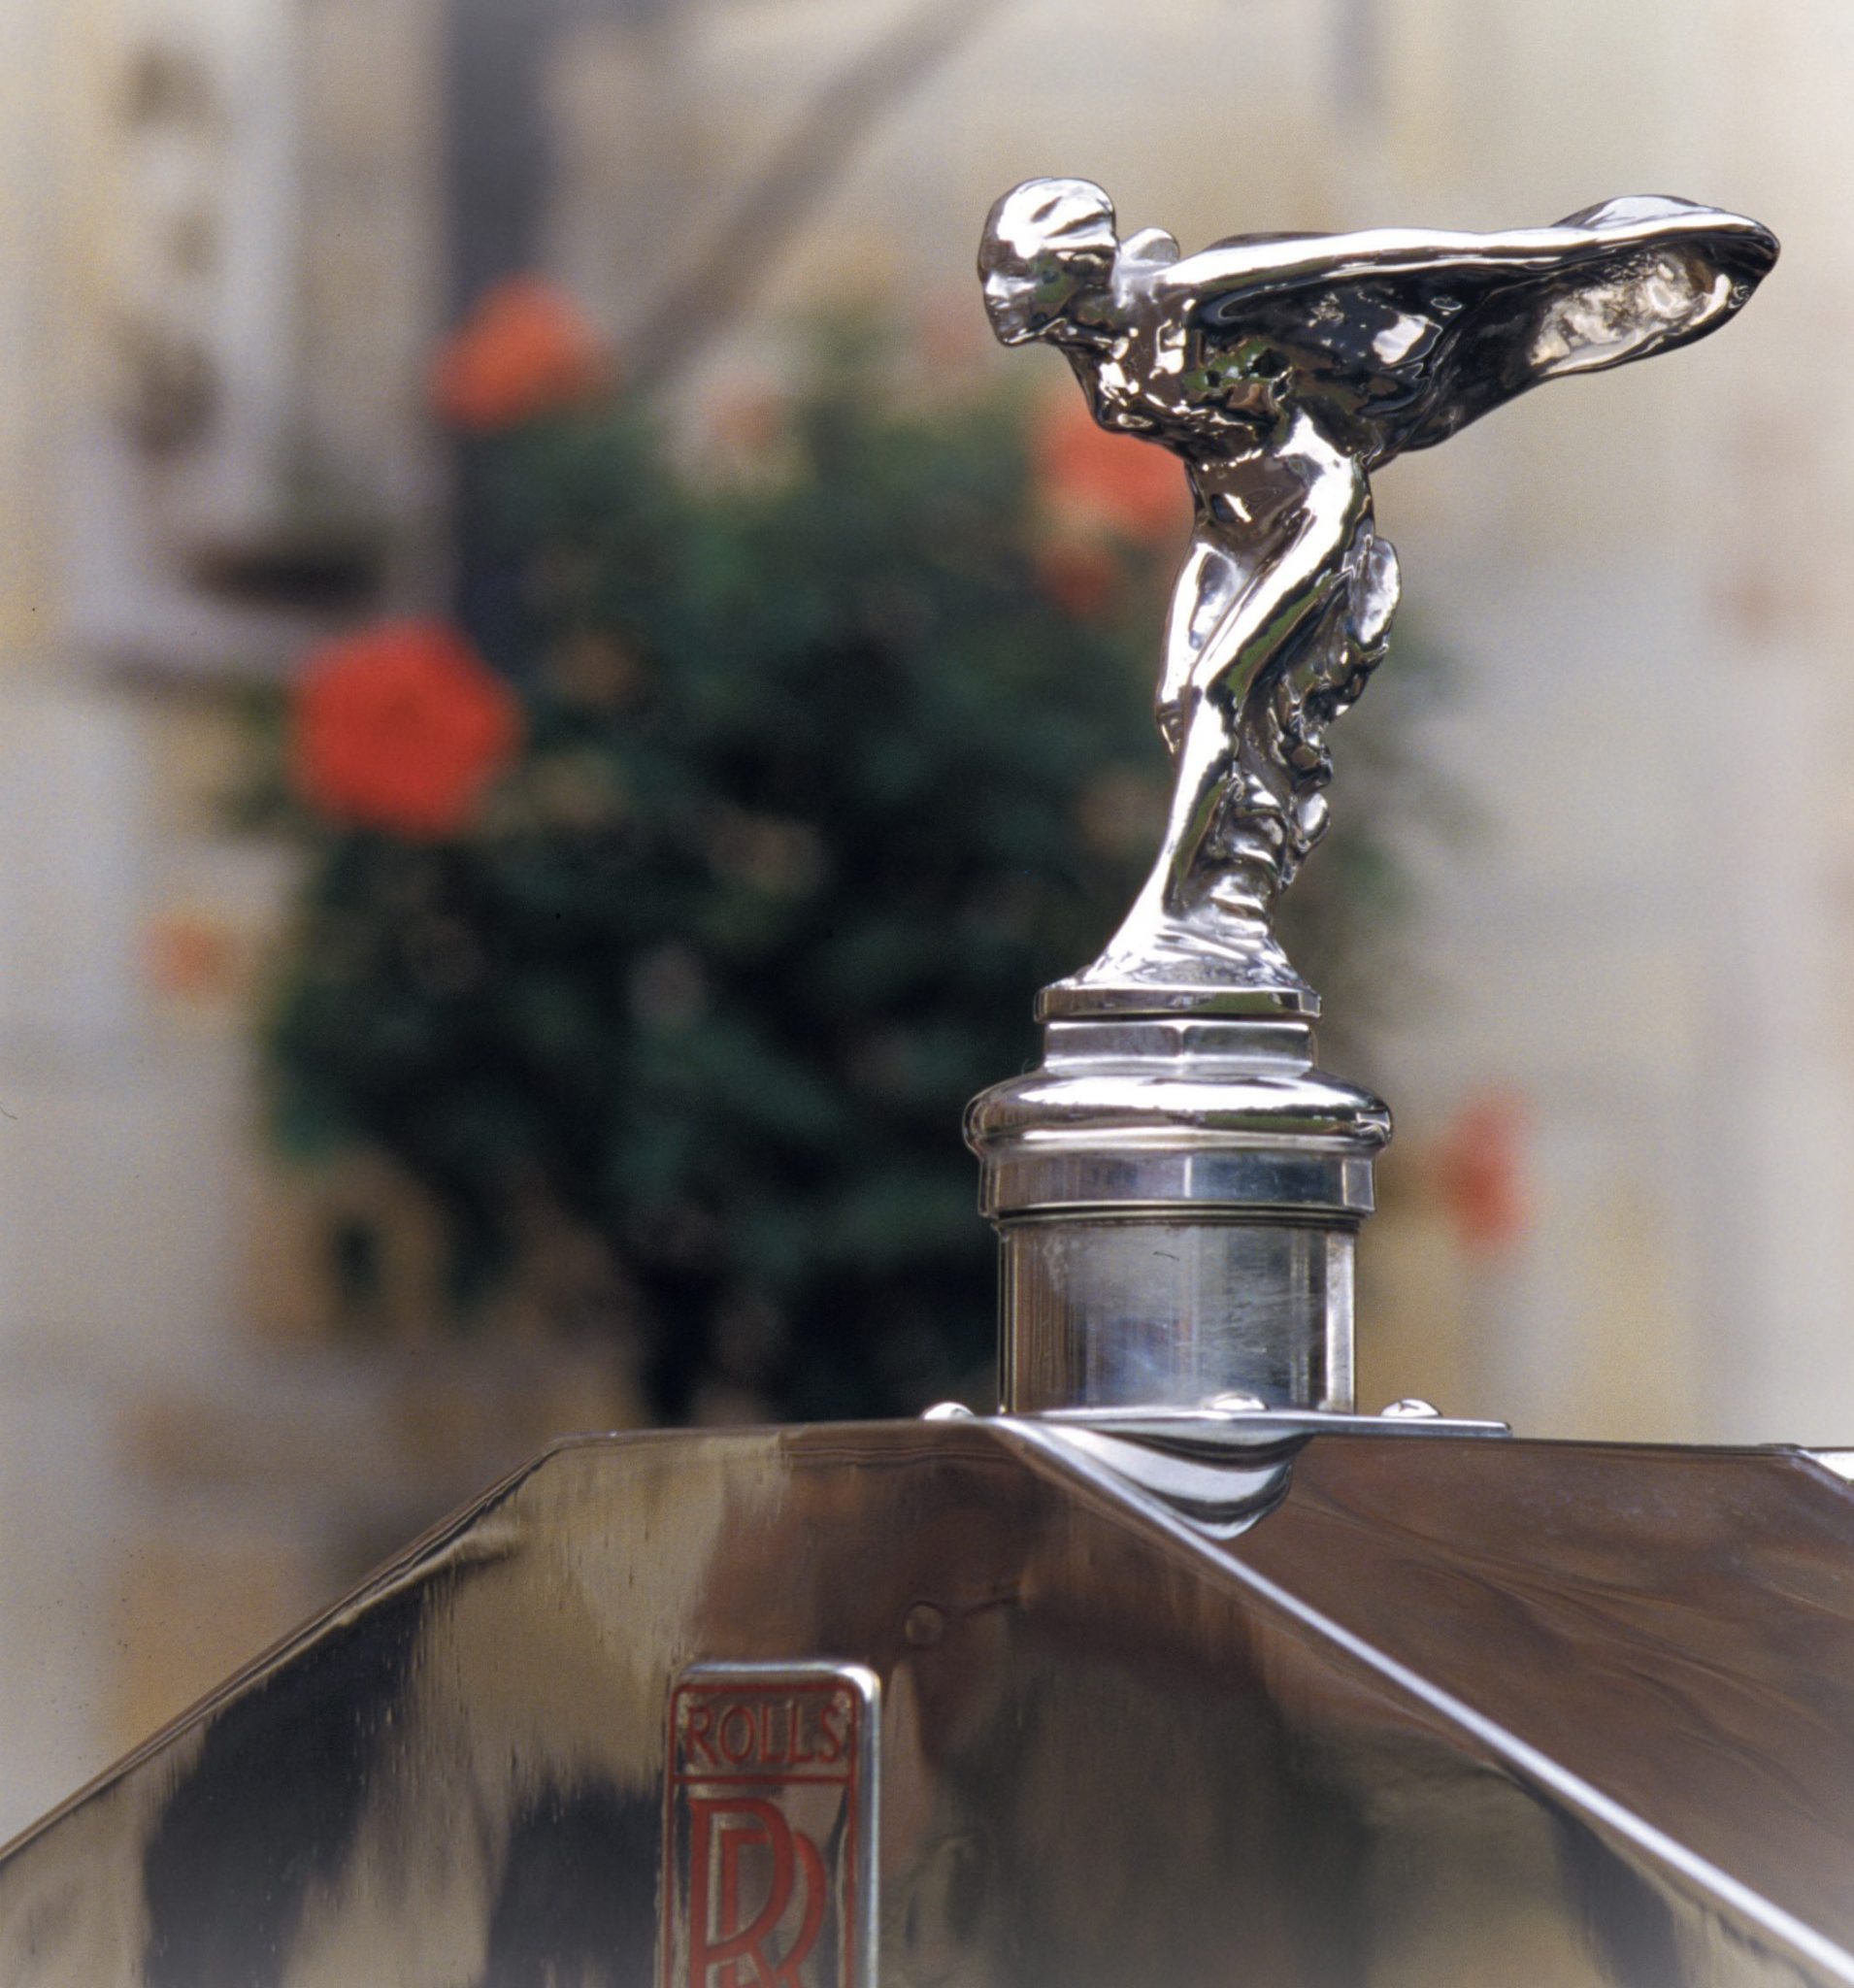 Known as The Spirit of Ecstasy, the Rolls-Royce flying lady has become the embodiment of the marque, a symbol recognized the world over since 1911.